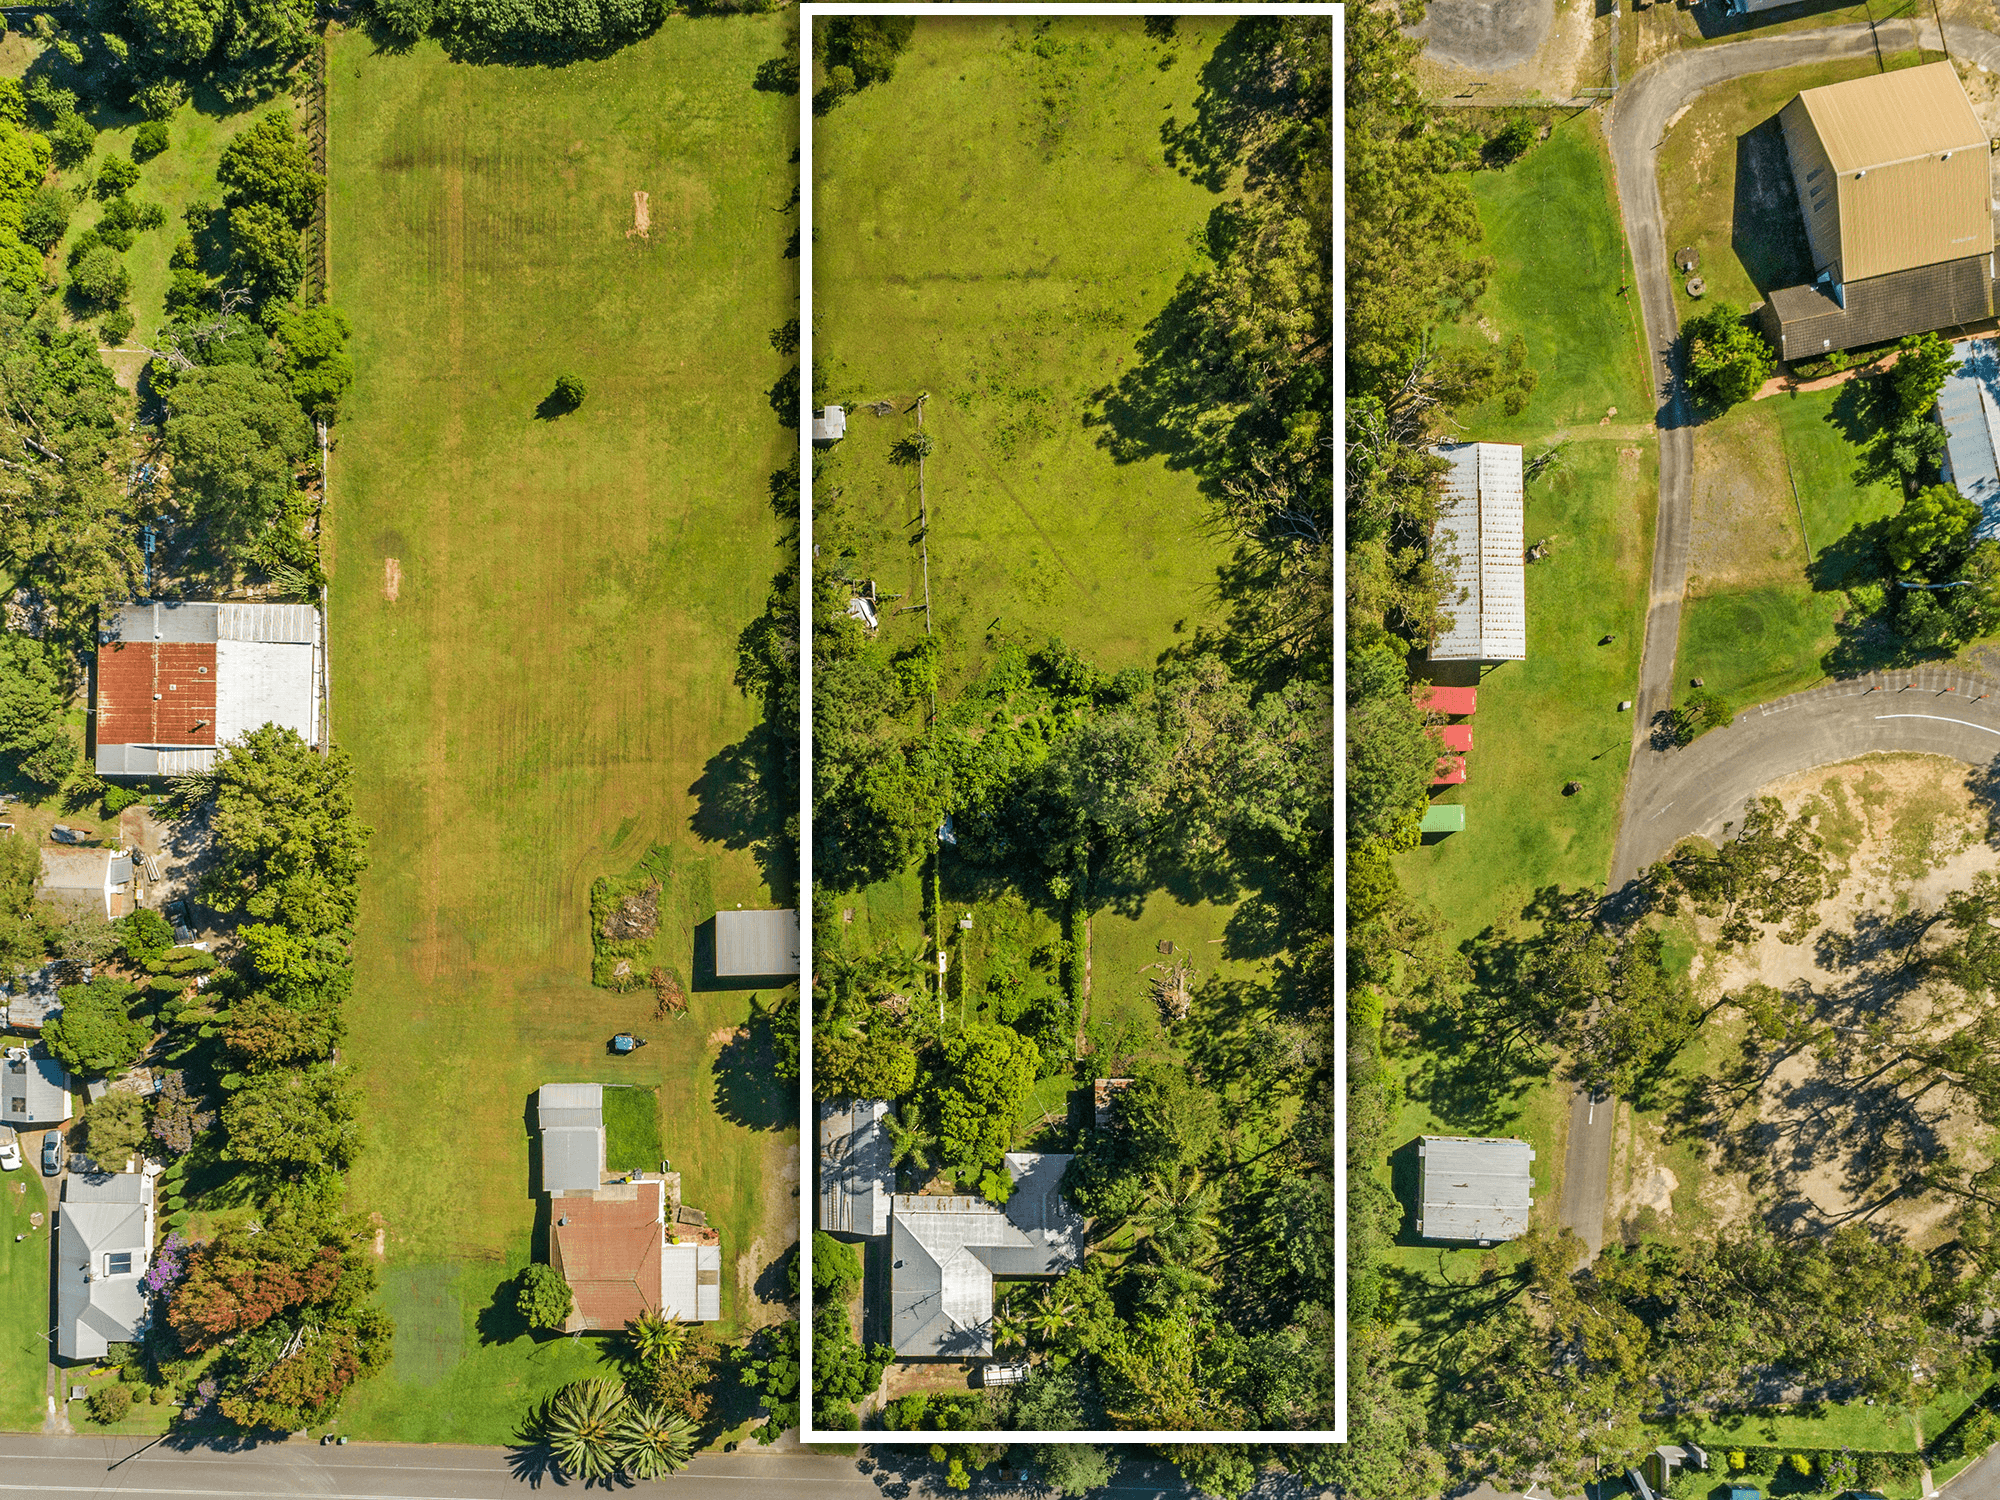 110 Avondale Road, COORANBONG, NSW 2265